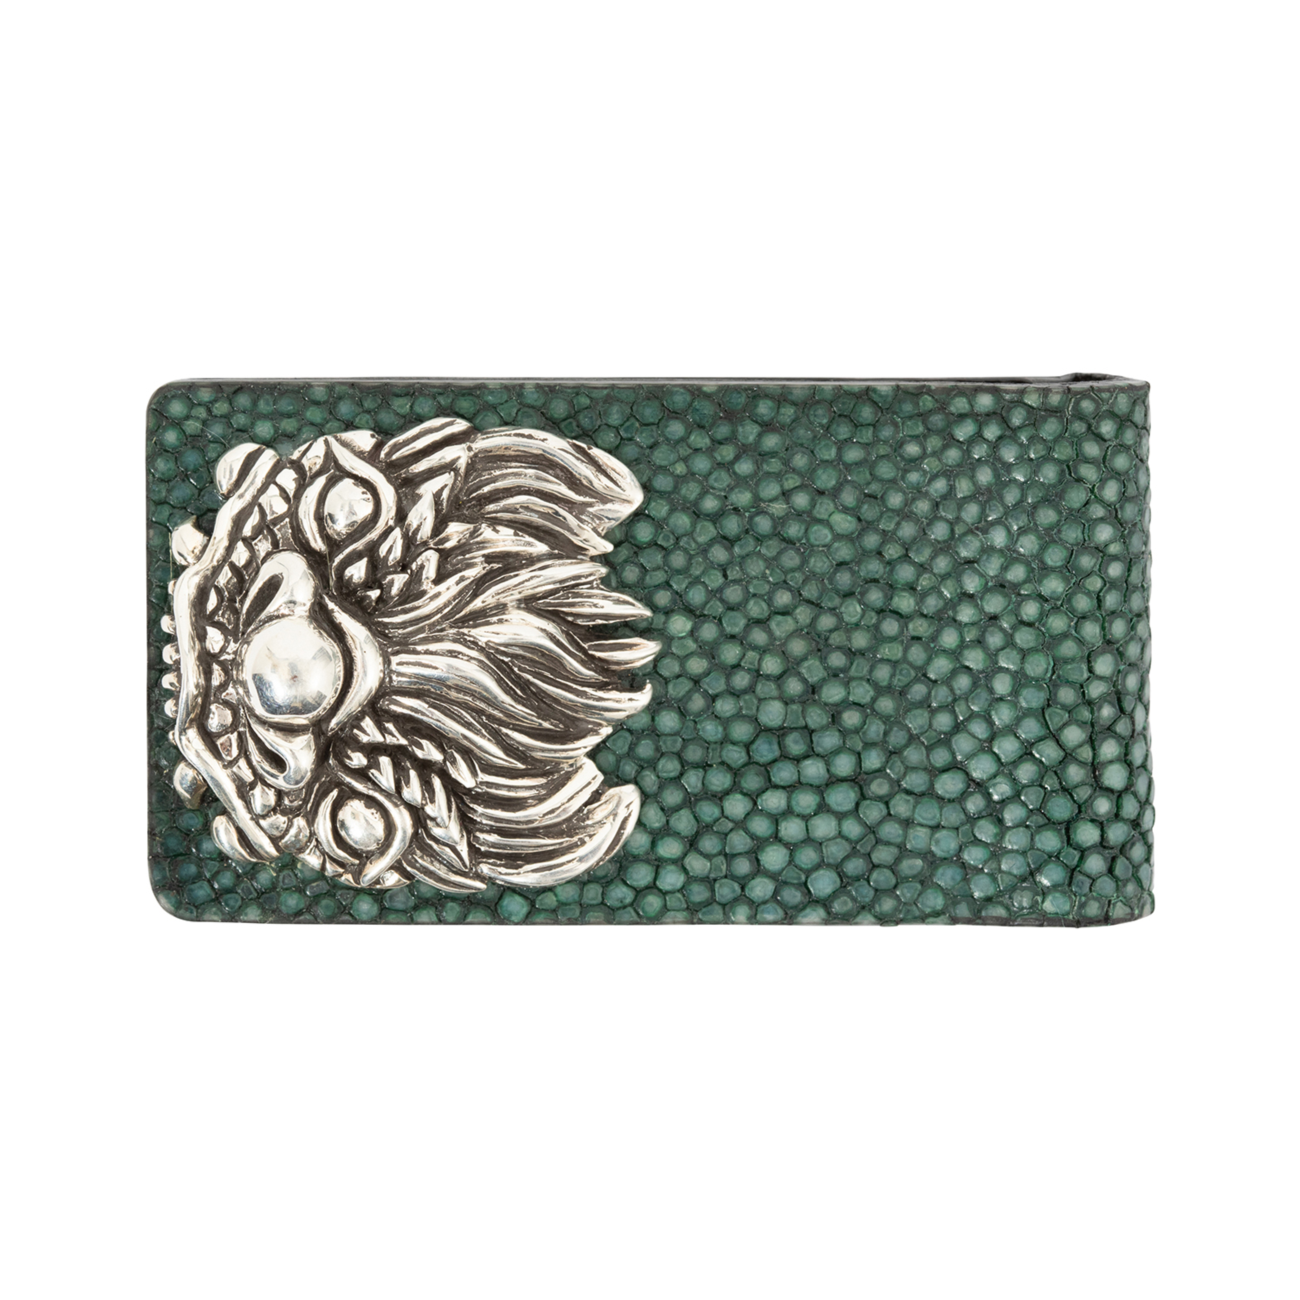 Galuchat Leather Money Clip with Dragon Fish